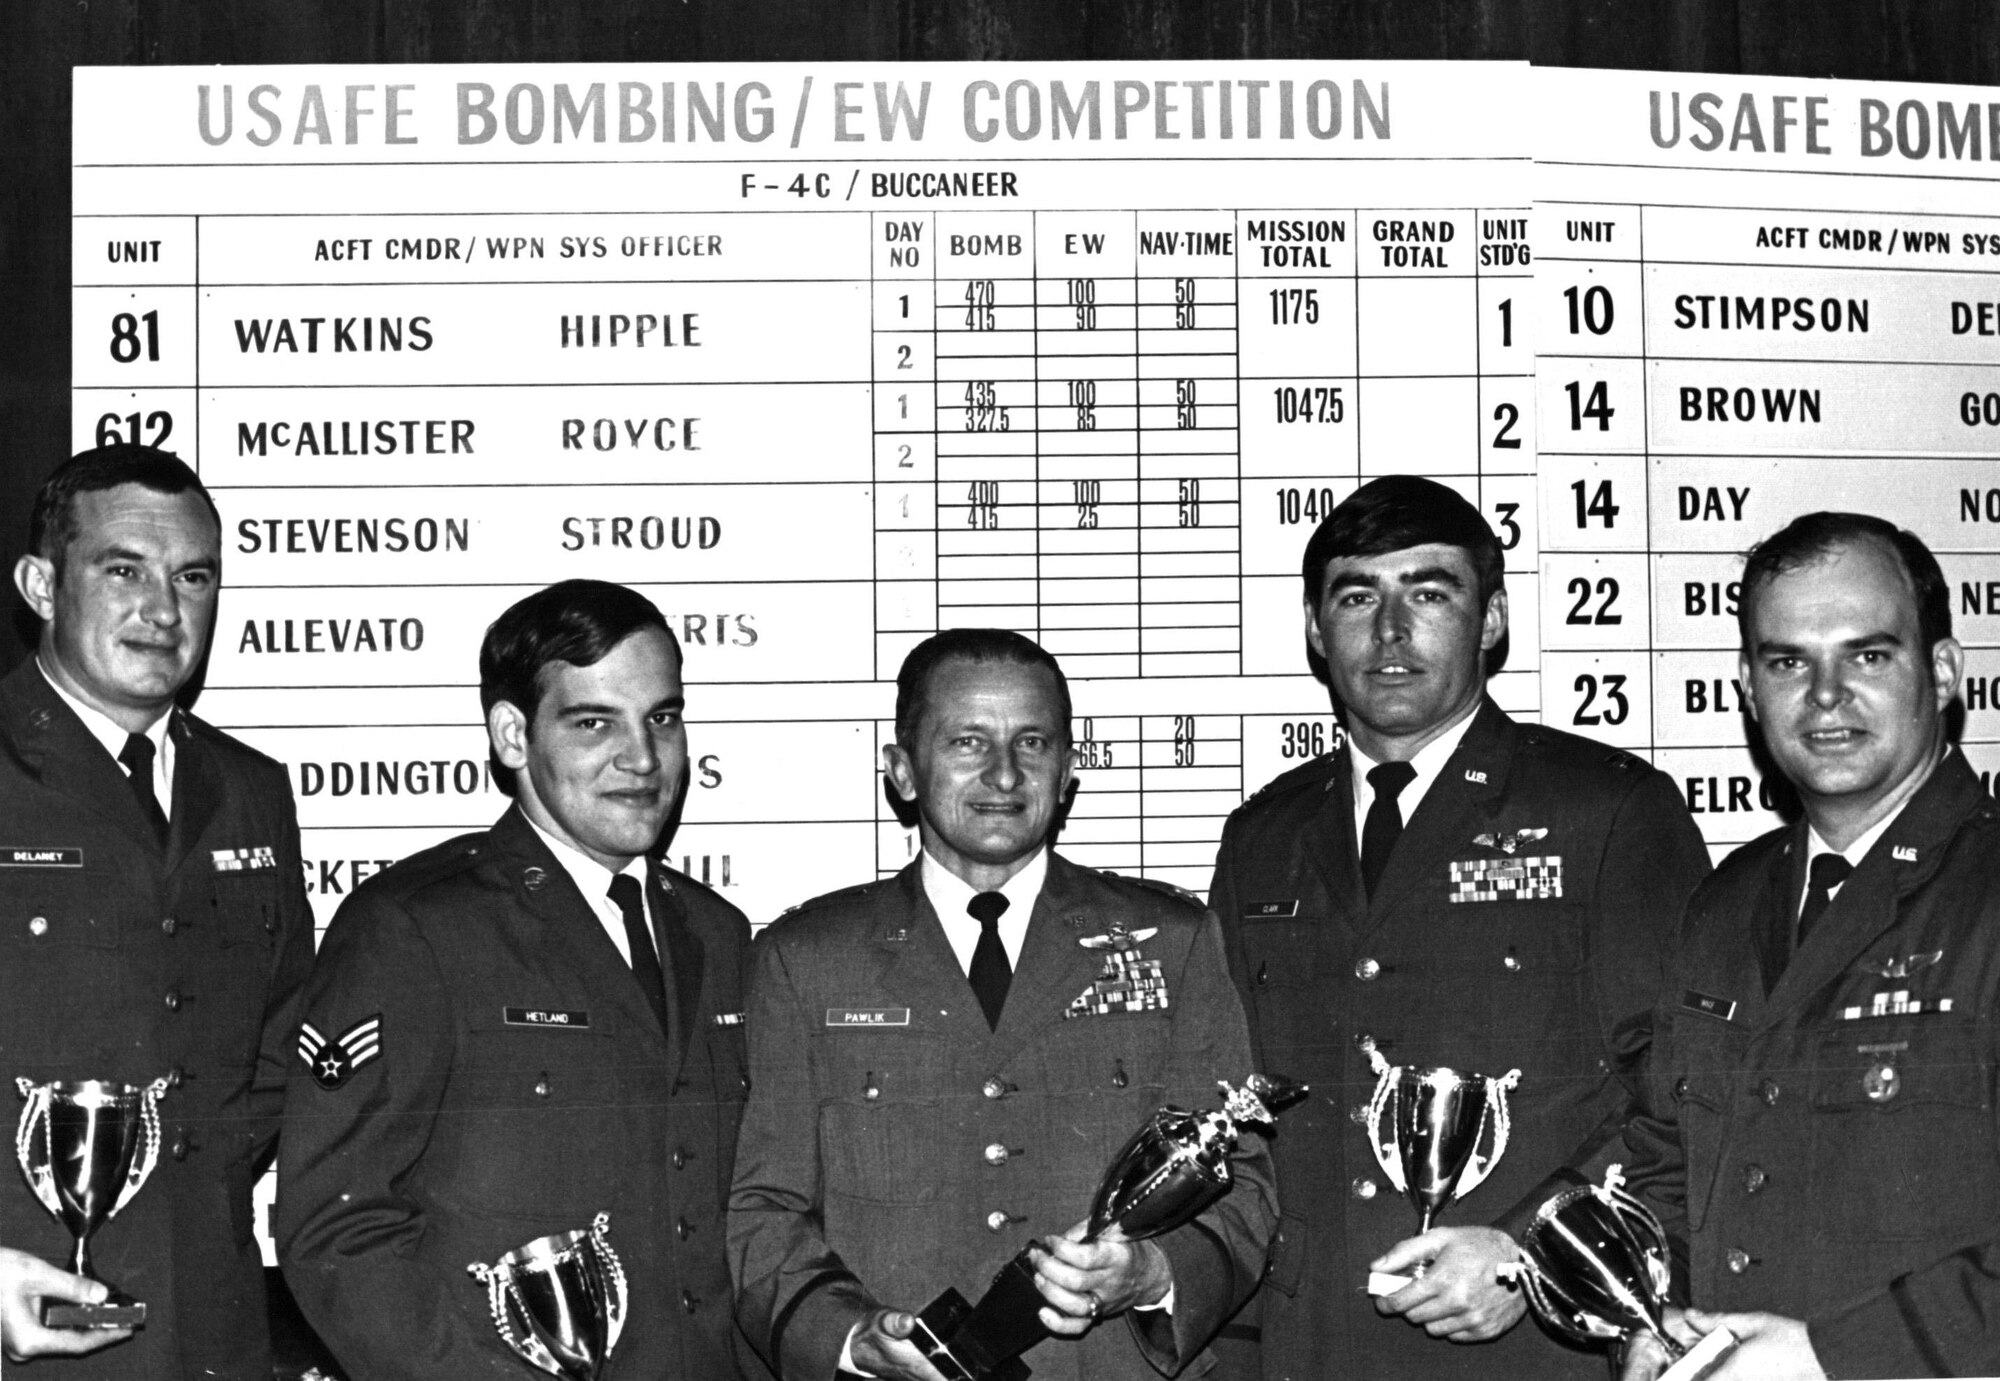 Retired U.S. Air Force Lt. Col. Harry Pawlik (center) and his team pose together after achieveing first place in a bombing competition in Upper Heyford, England in 1975. Pawlik is a concentration camp survivor who joined the Air Force after gaining citizenship. (Courtesy Photo)